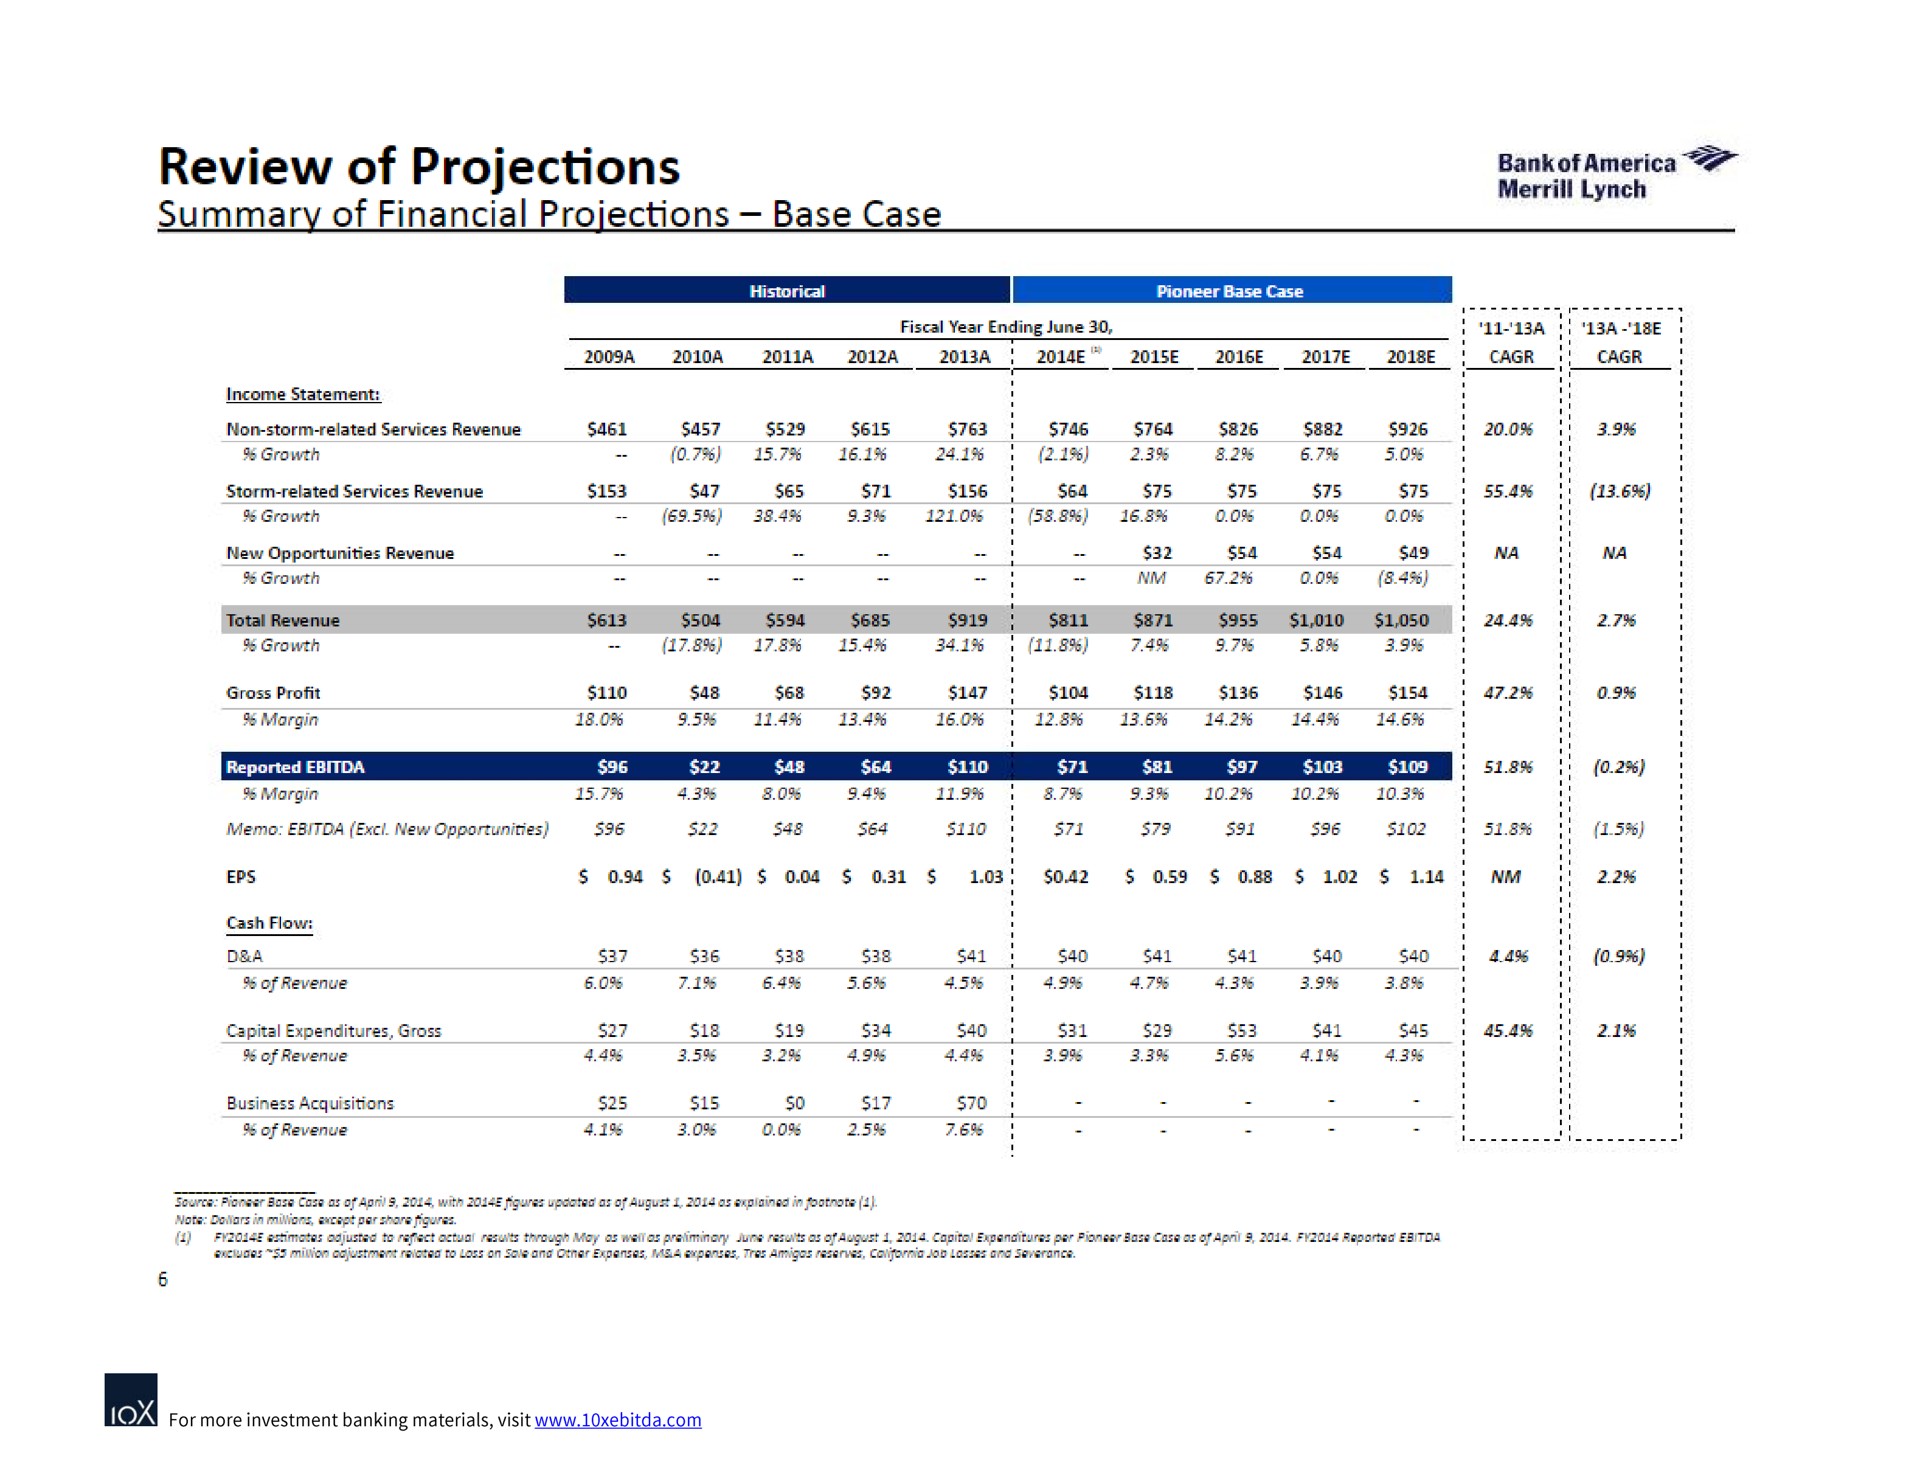 review of projections | Bank of America